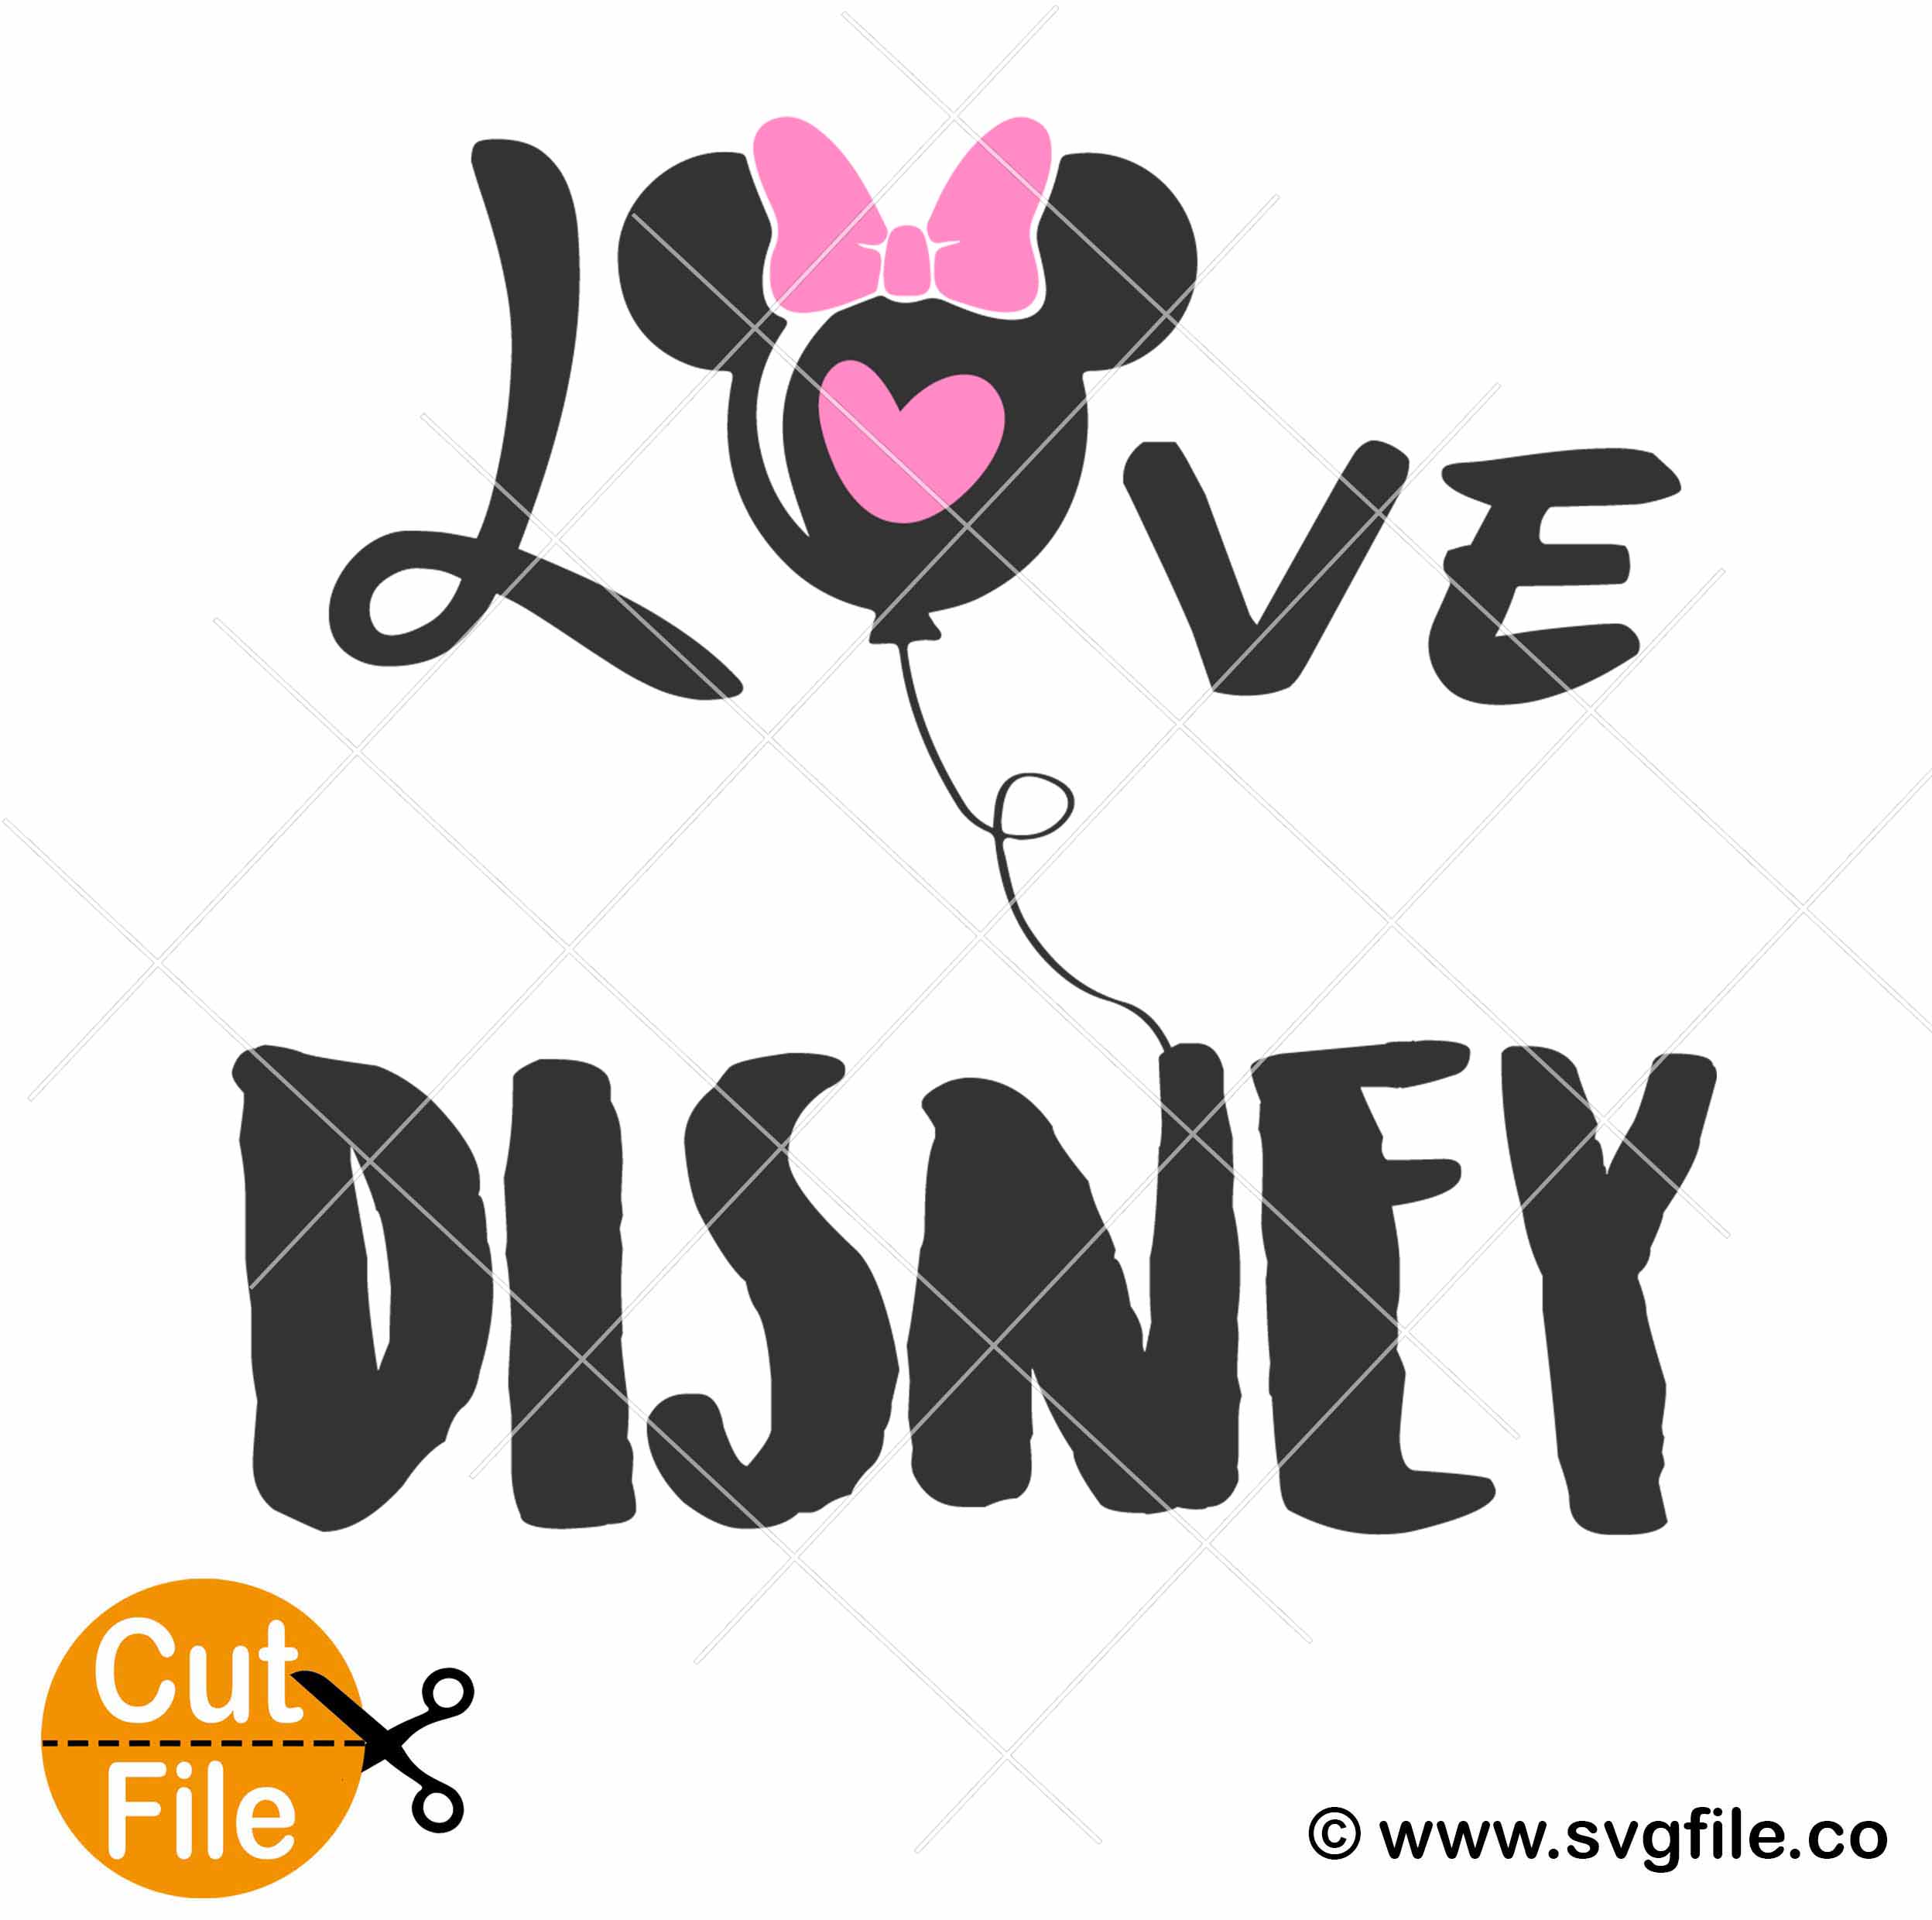 Minnie-Mickey Baloons png, svg and jpeg file